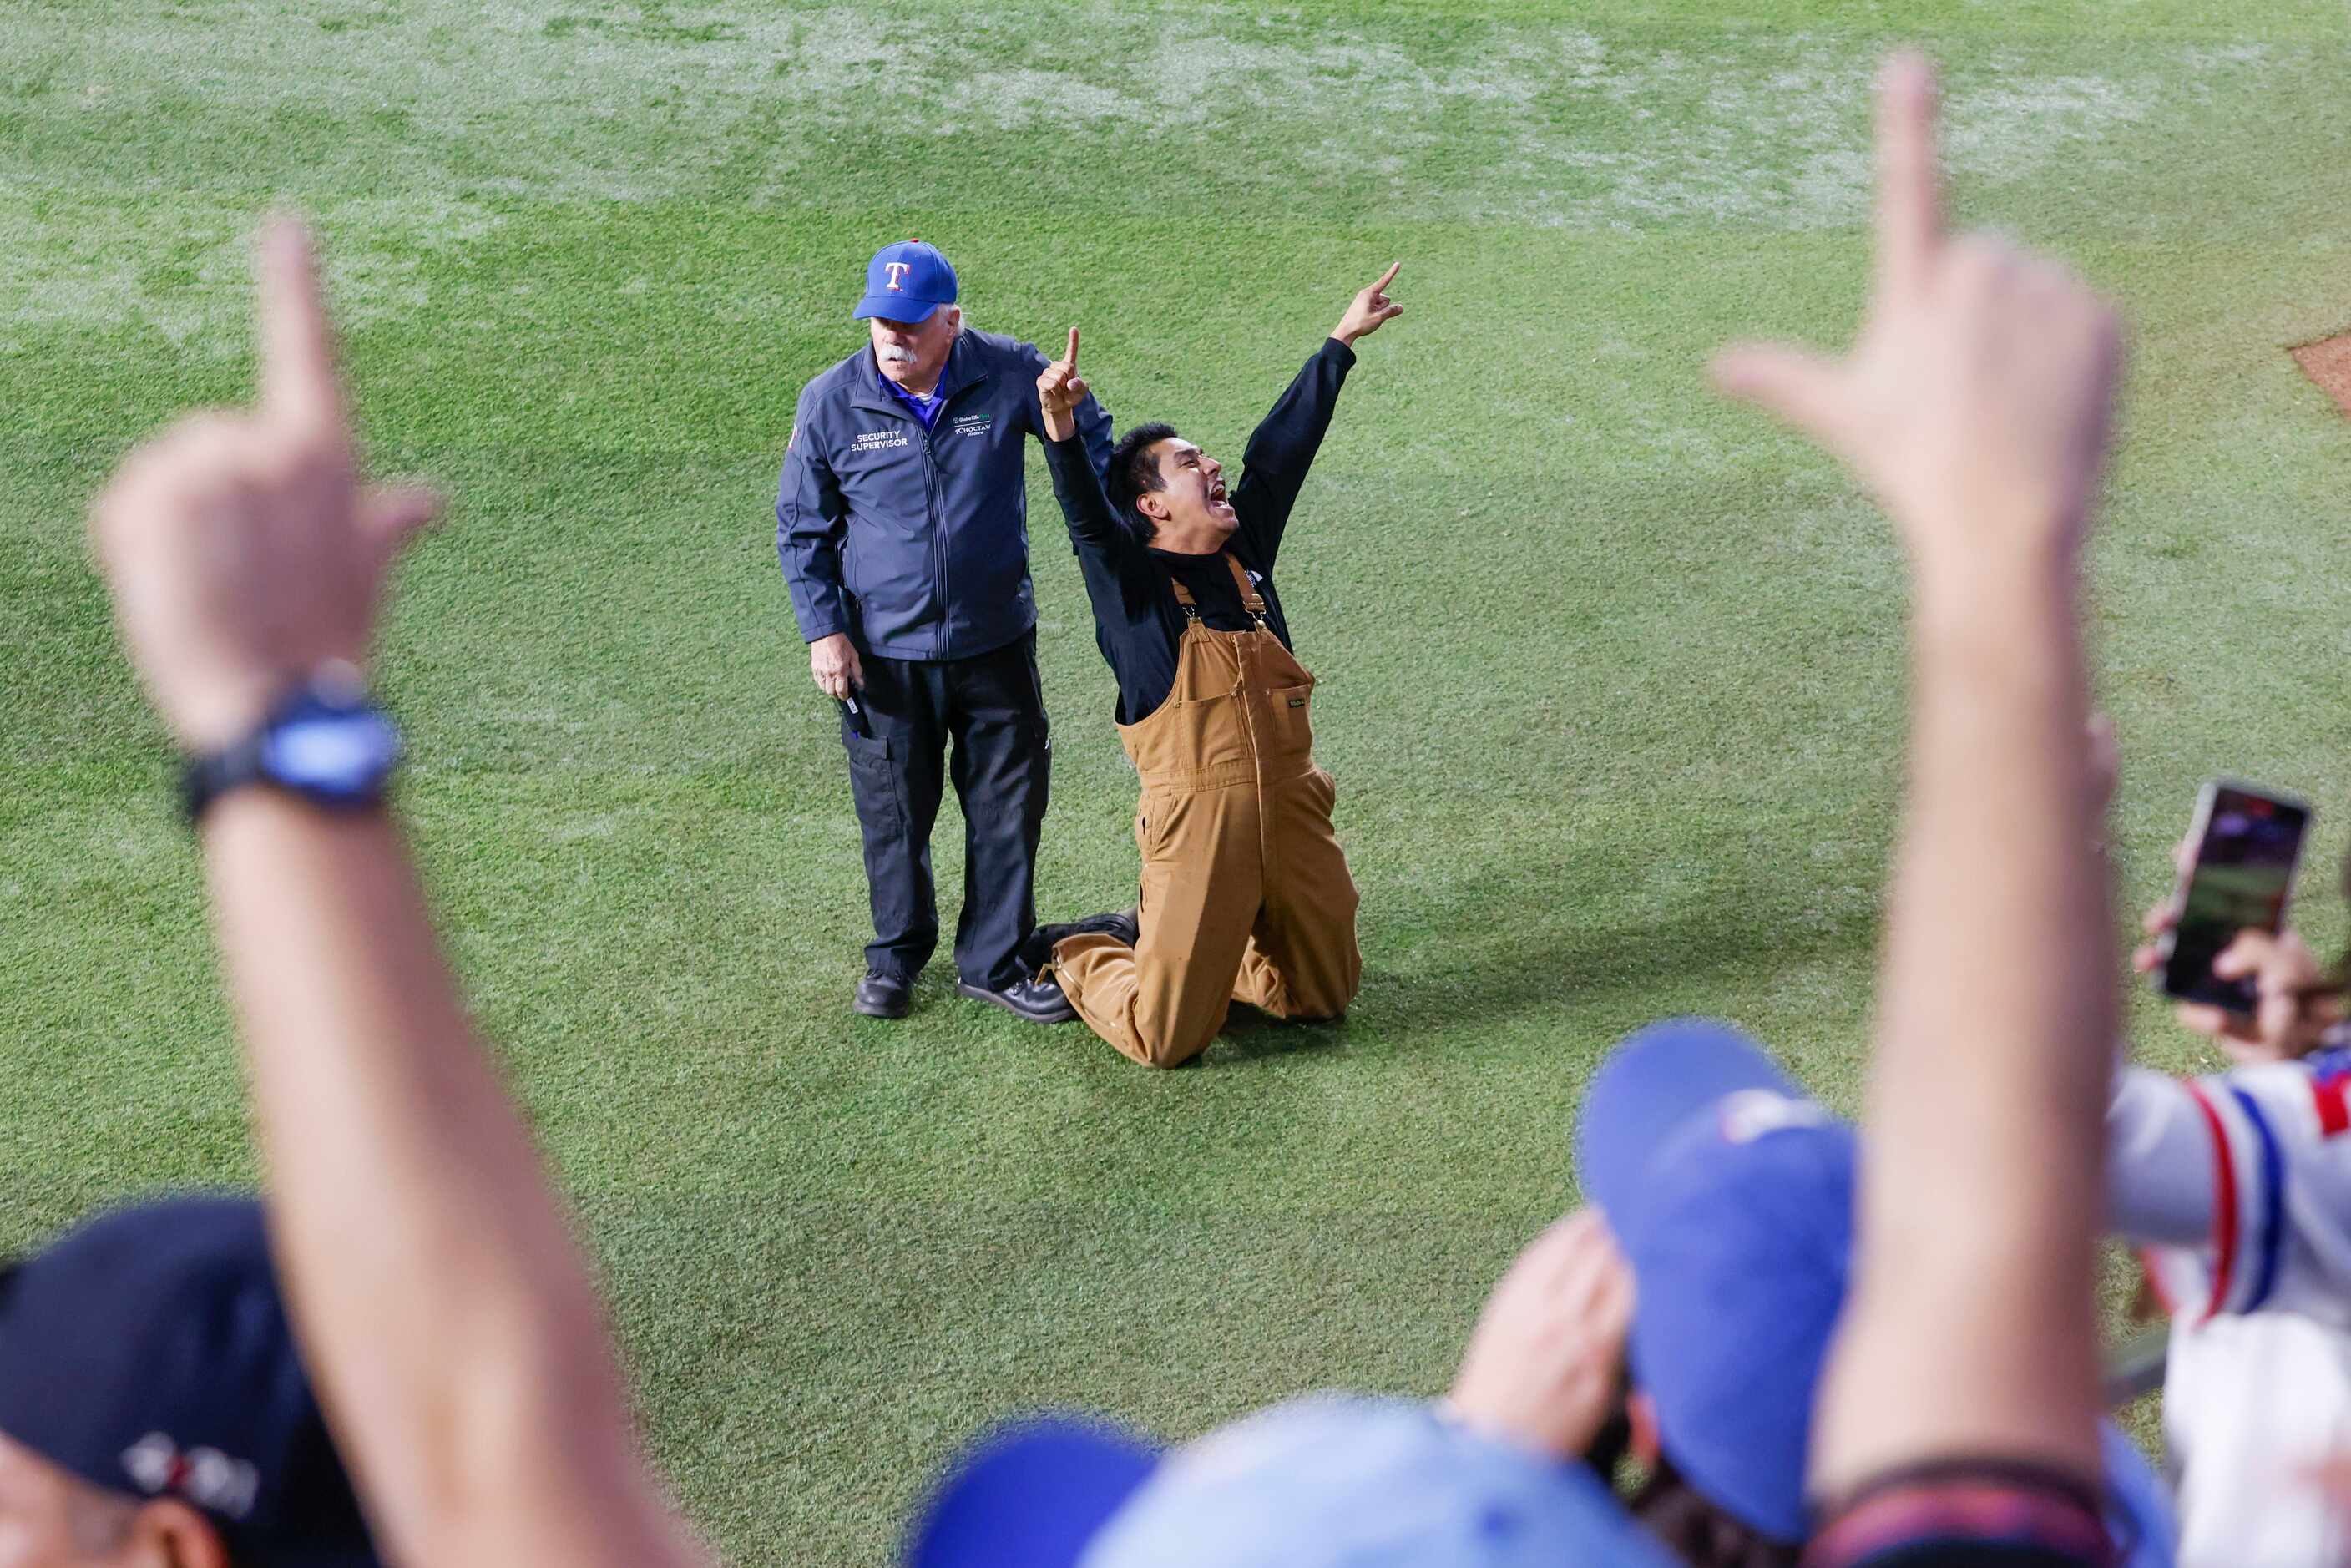 Security detains a fan who ran onto the field following Texas Rangers’ winning the World...